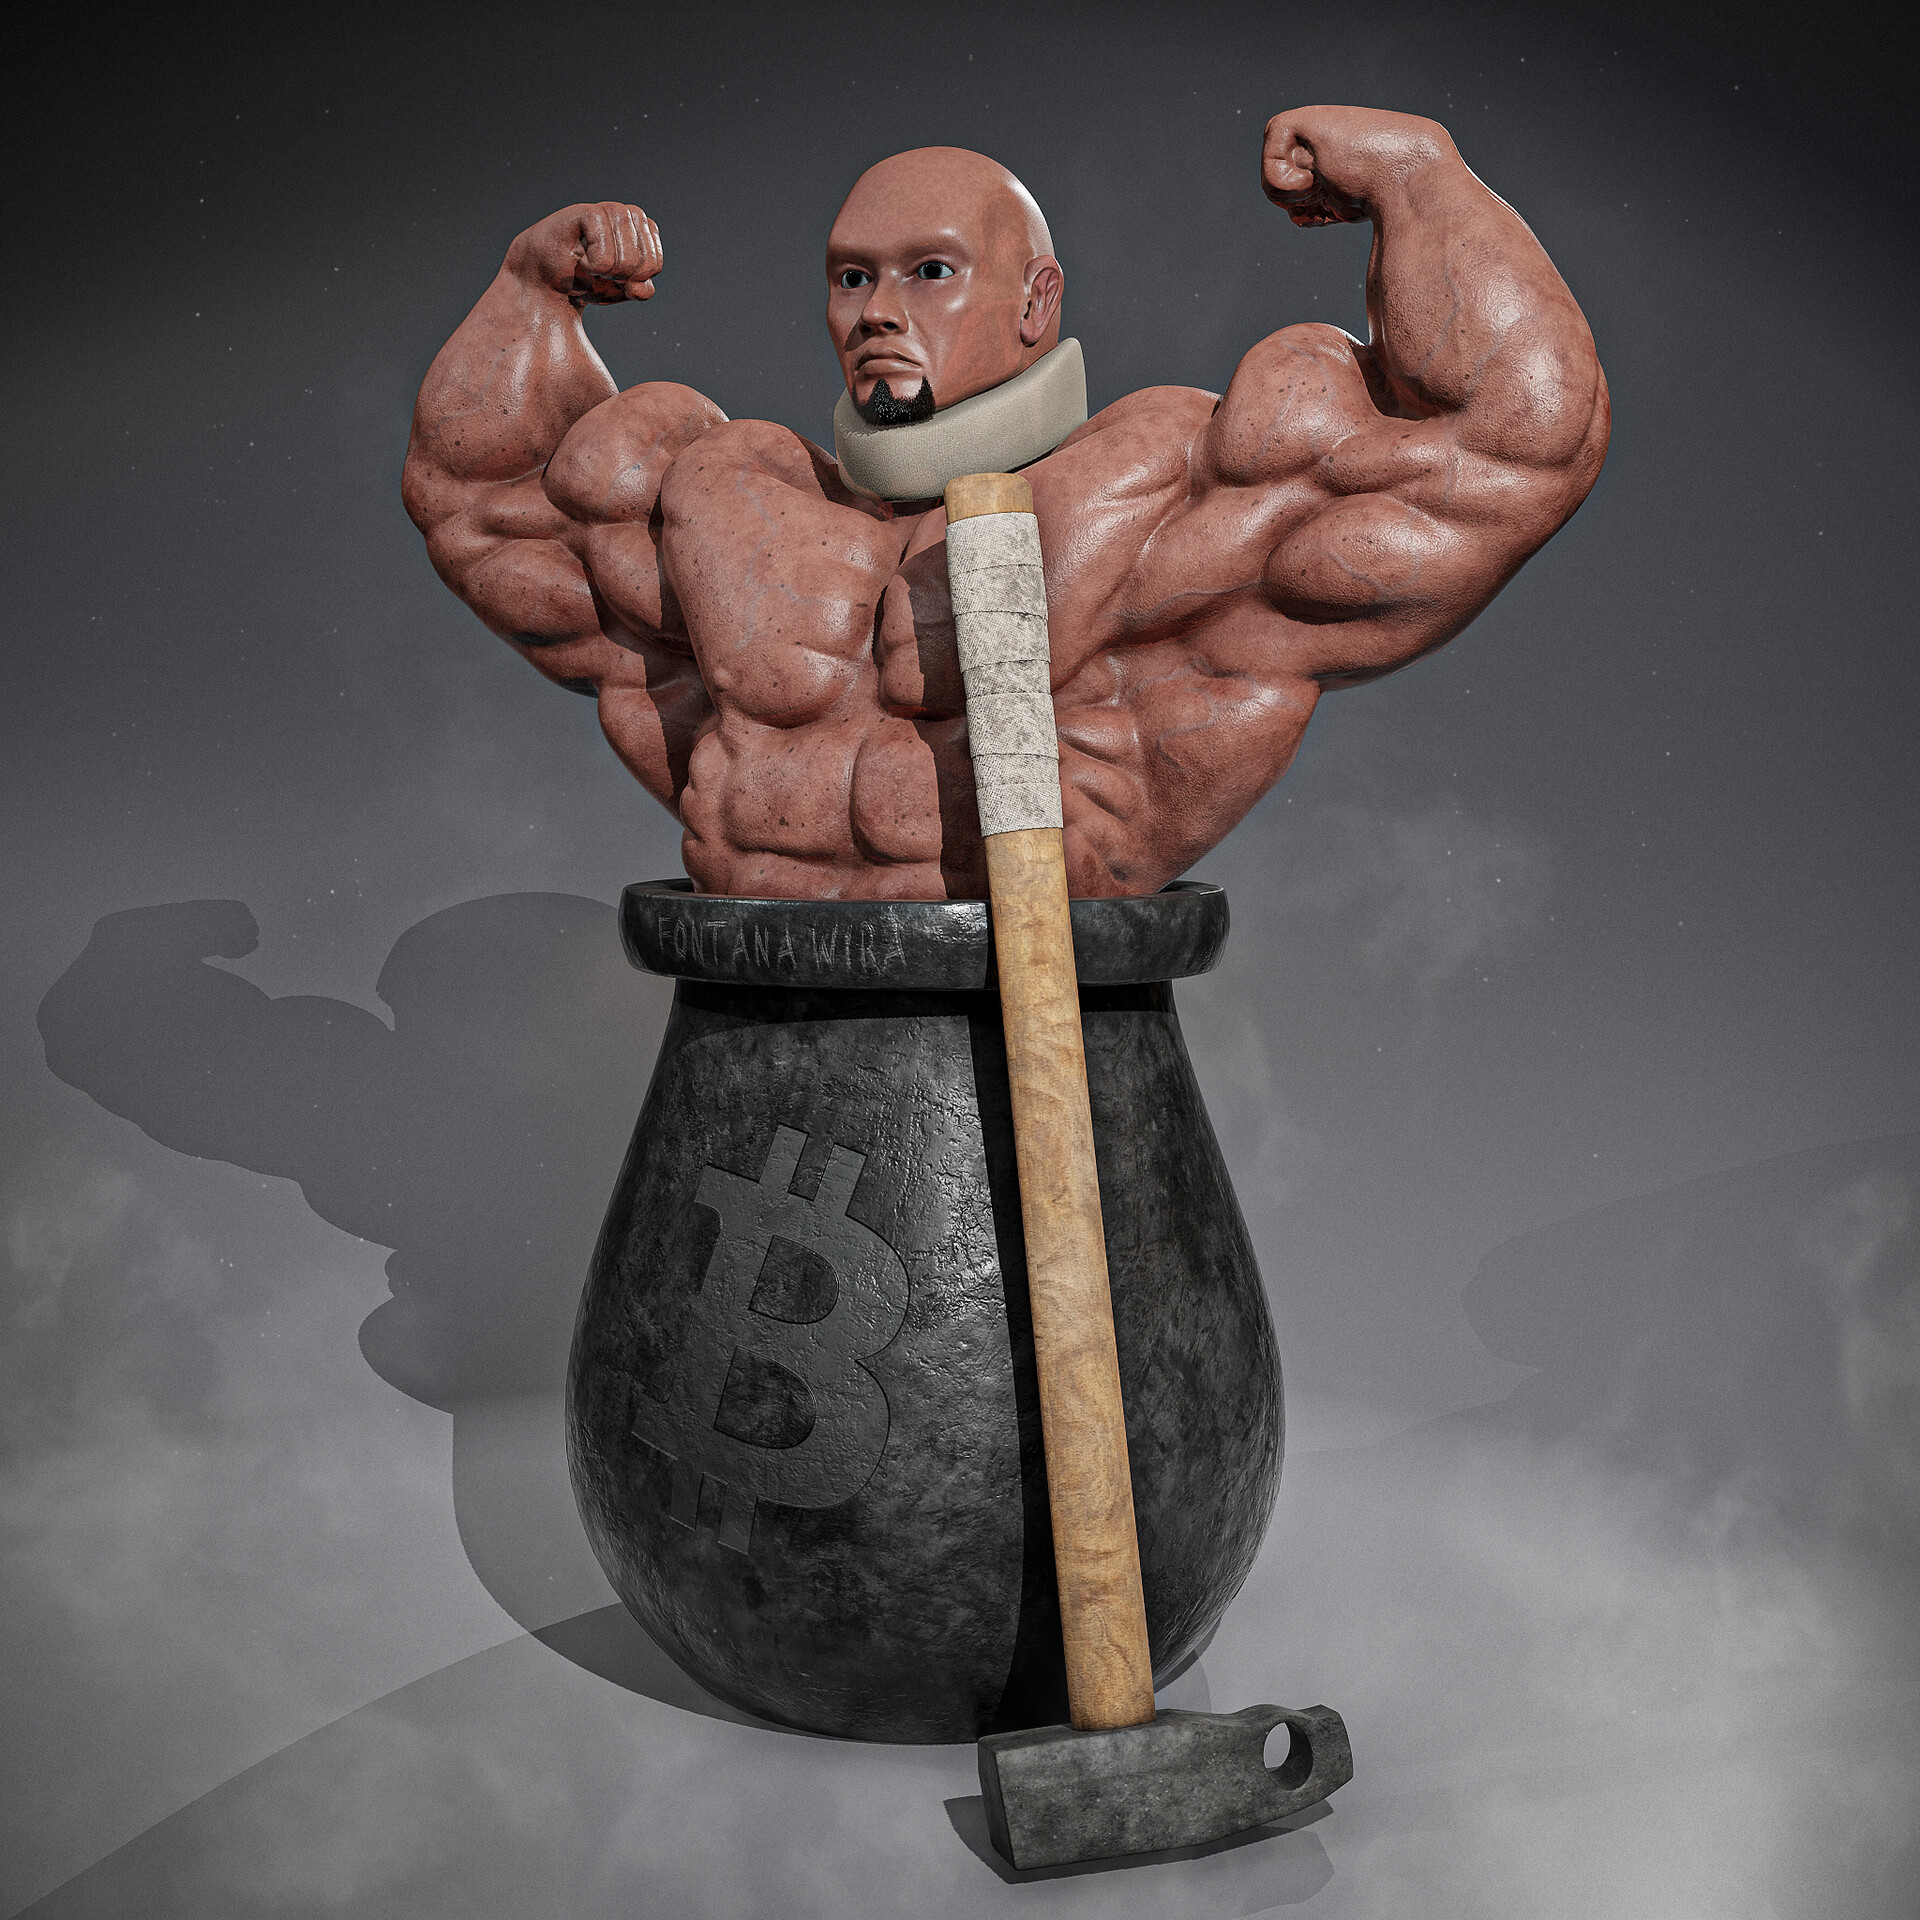 Getting Over It with Bennett Foddy Free Download Full Setup